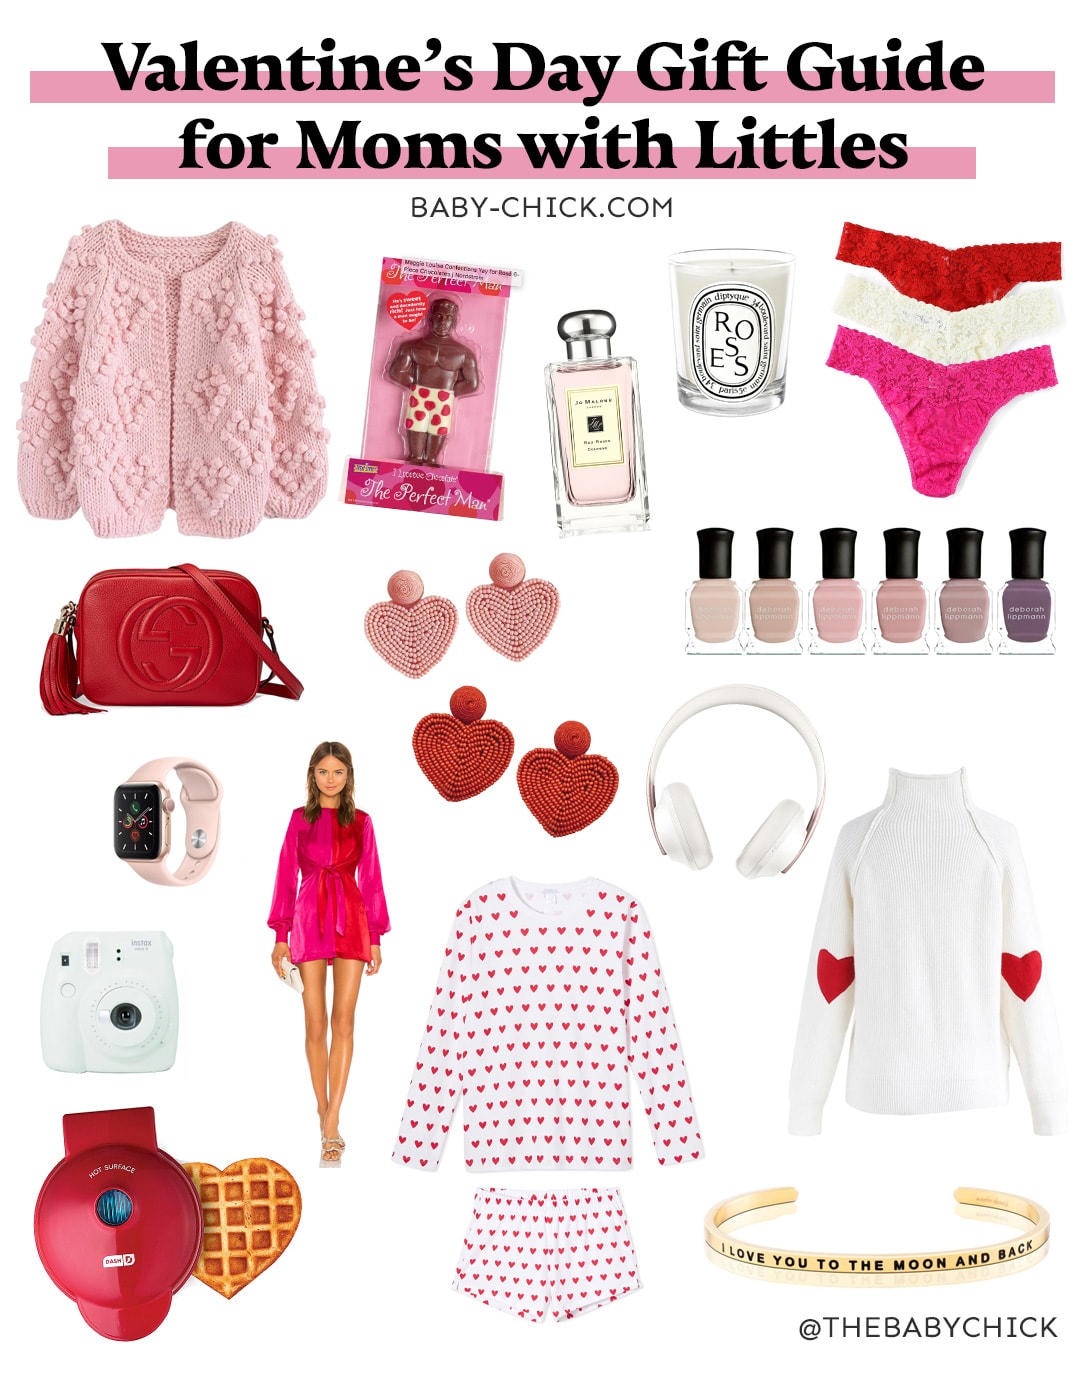 Valentine's Day Gift Guide for Moms with Littles collage